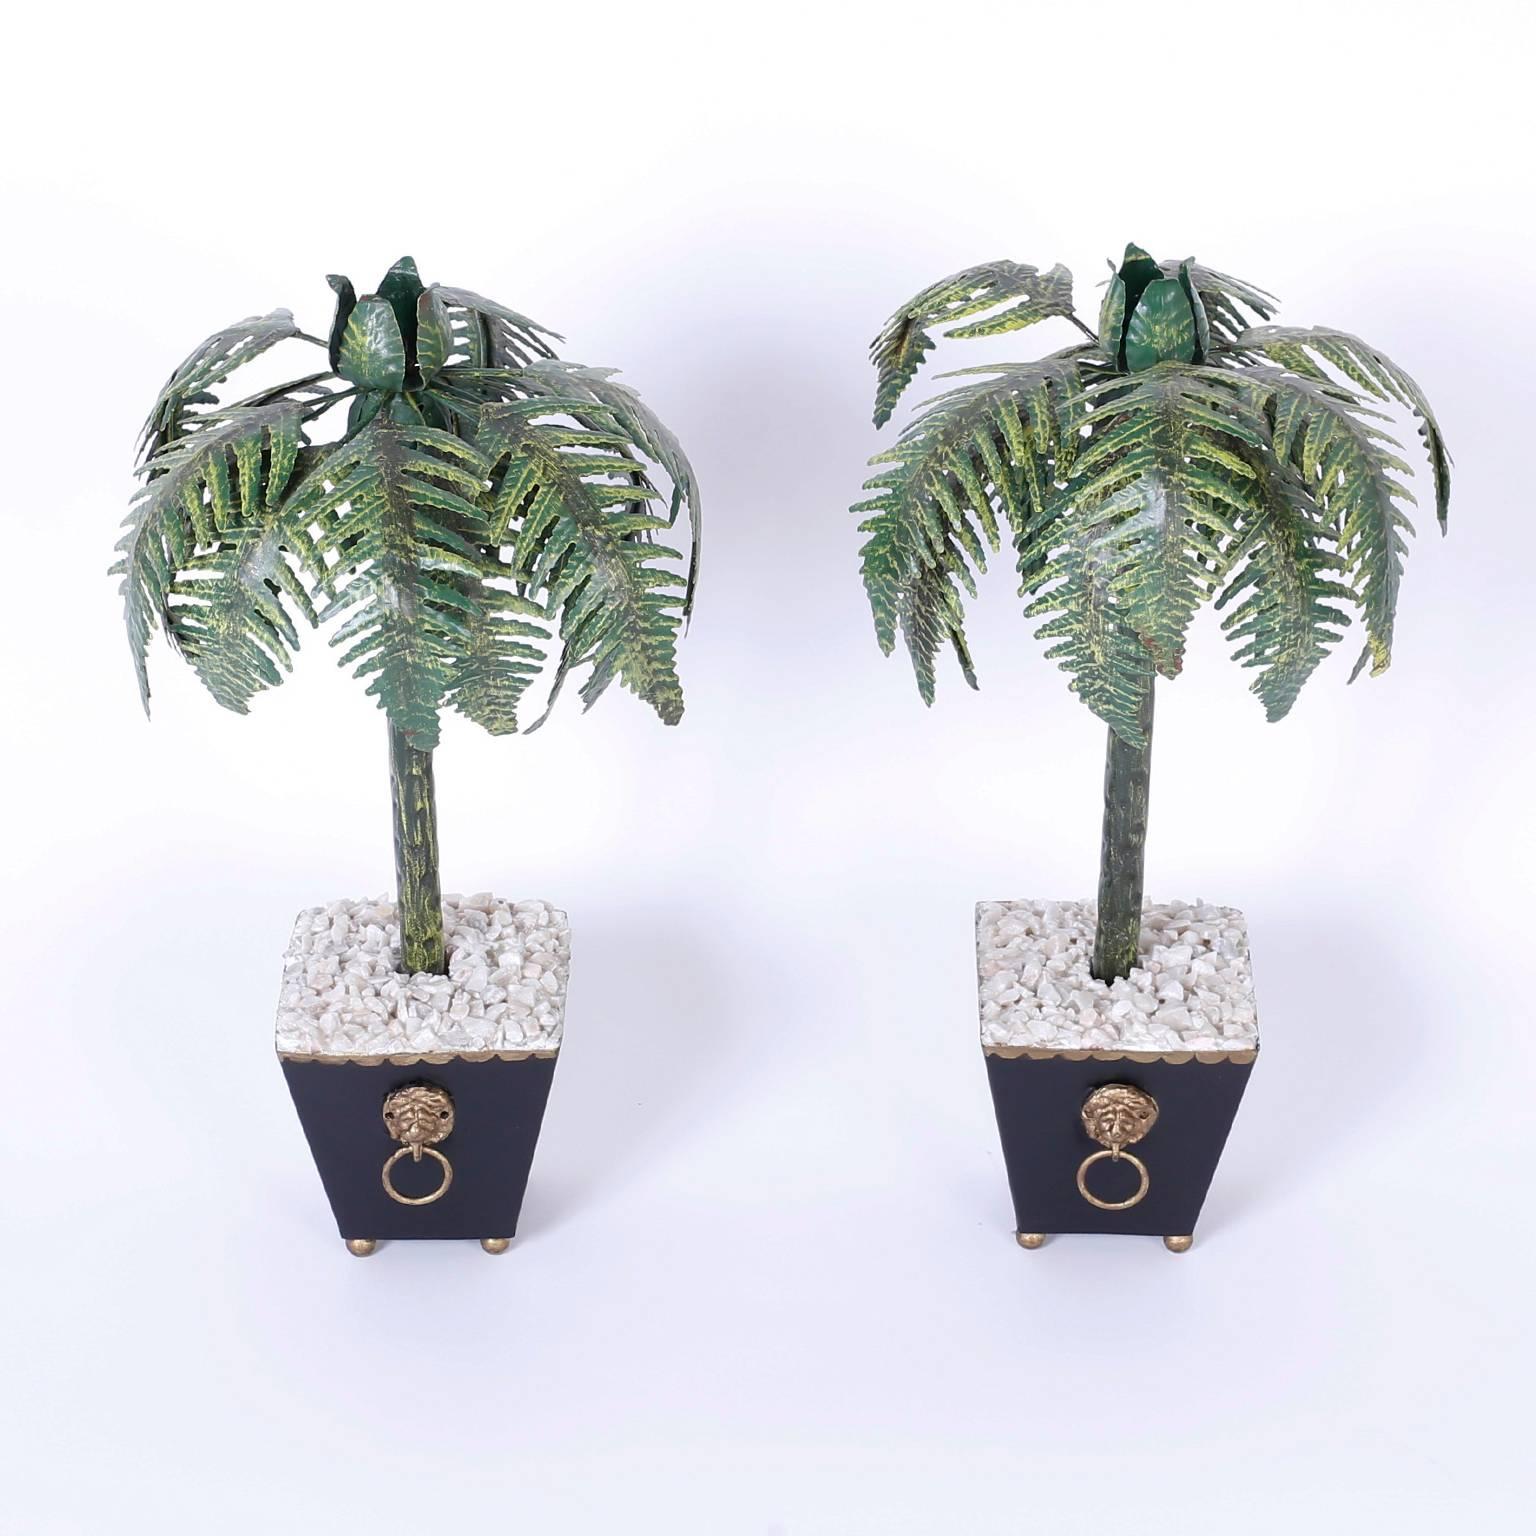 Pair of tole Palm Tree candlesticks set in classical planter style bases with lion head ring handles, white stones, and ball feet. A rare large size for this form.